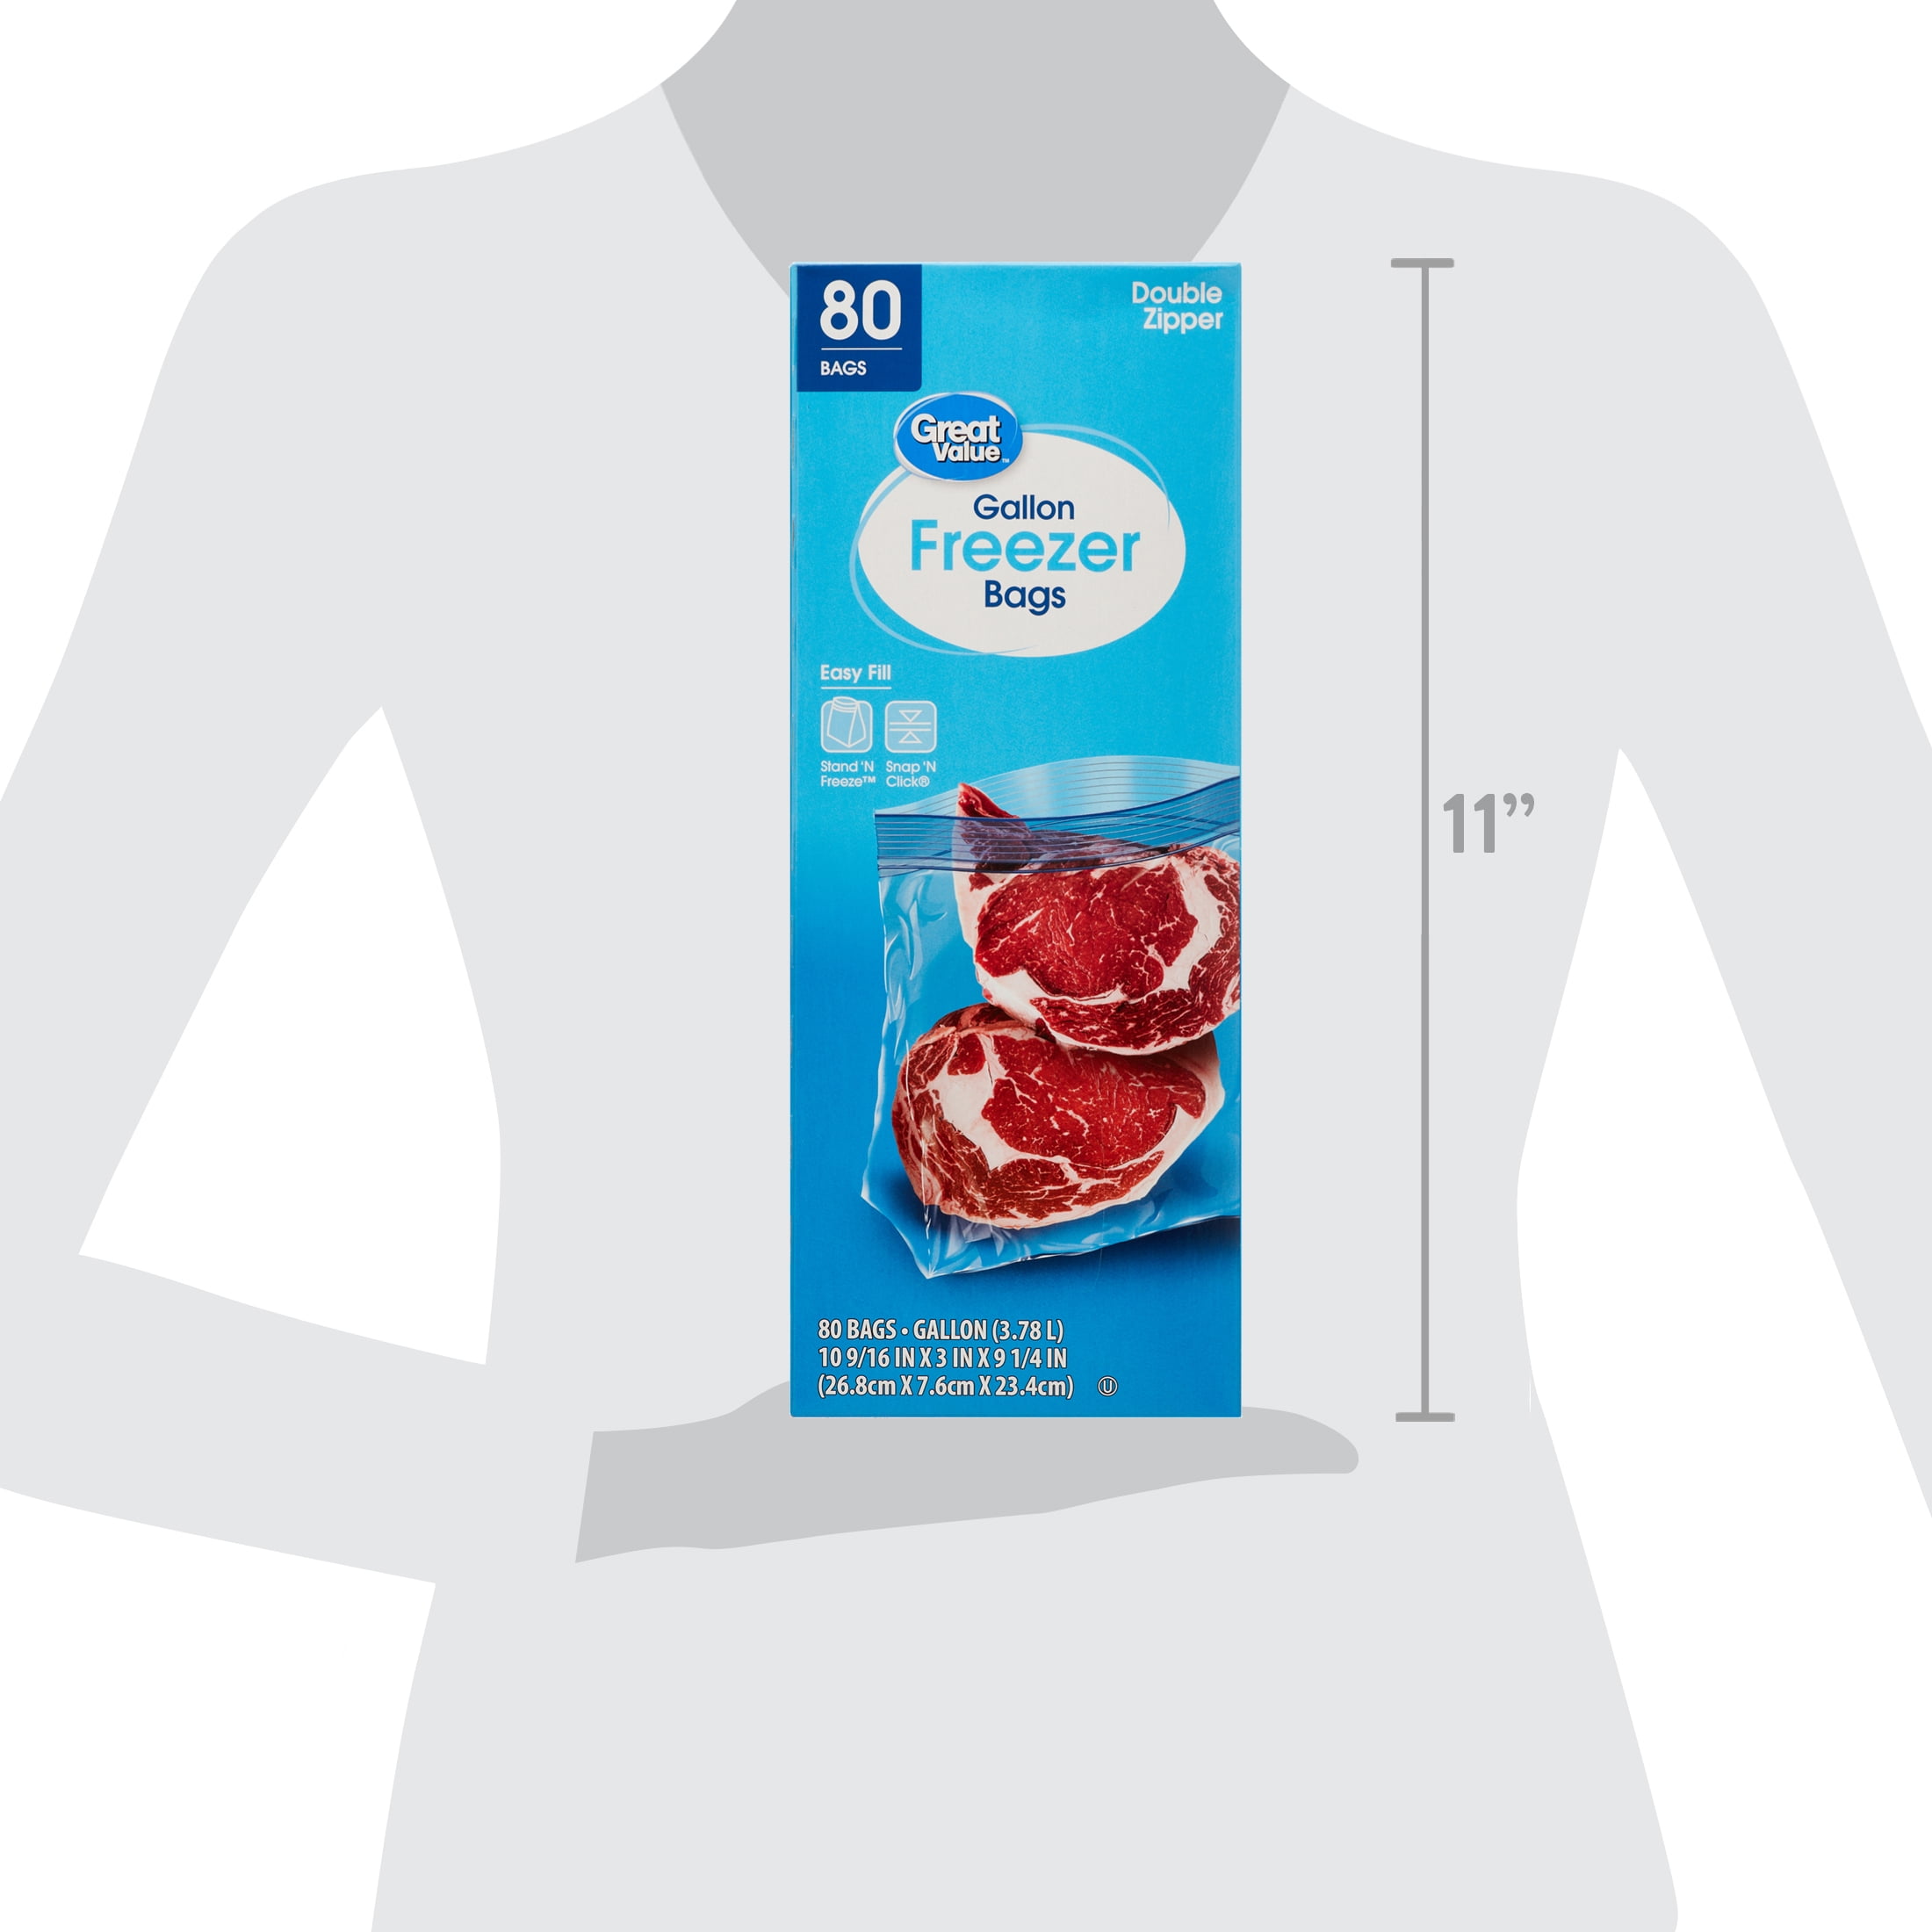 Dynamic 1 Gallon Freezer Bags (40 ct), Delivery Near You